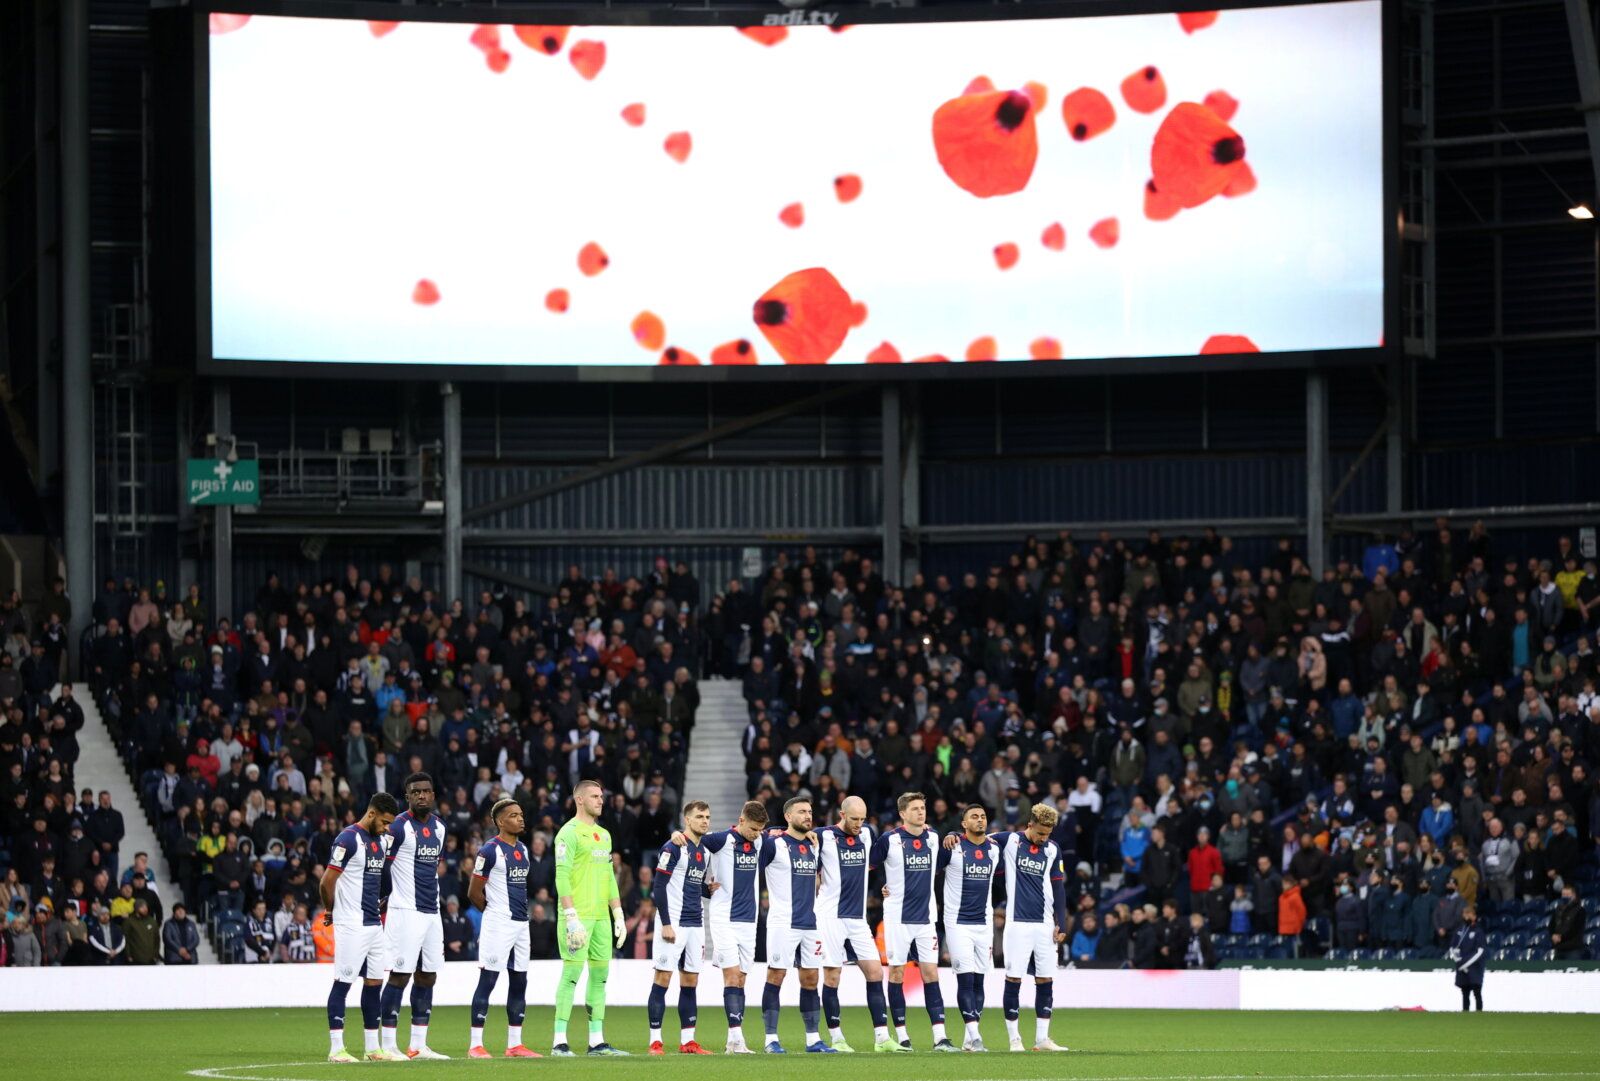 Soccer Football - Championship - West Bromwich Albion v Middlesbrough - The Hawthorns, West Bromwich, Britain - November 6, 2021 General view during a minutes silence as part of remembrance commemorations before the match  Action Images/Molly Darlington  EDITORIAL USE ONLY. No use with unauthorized audio, video, data, fixture lists, club/league logos or 